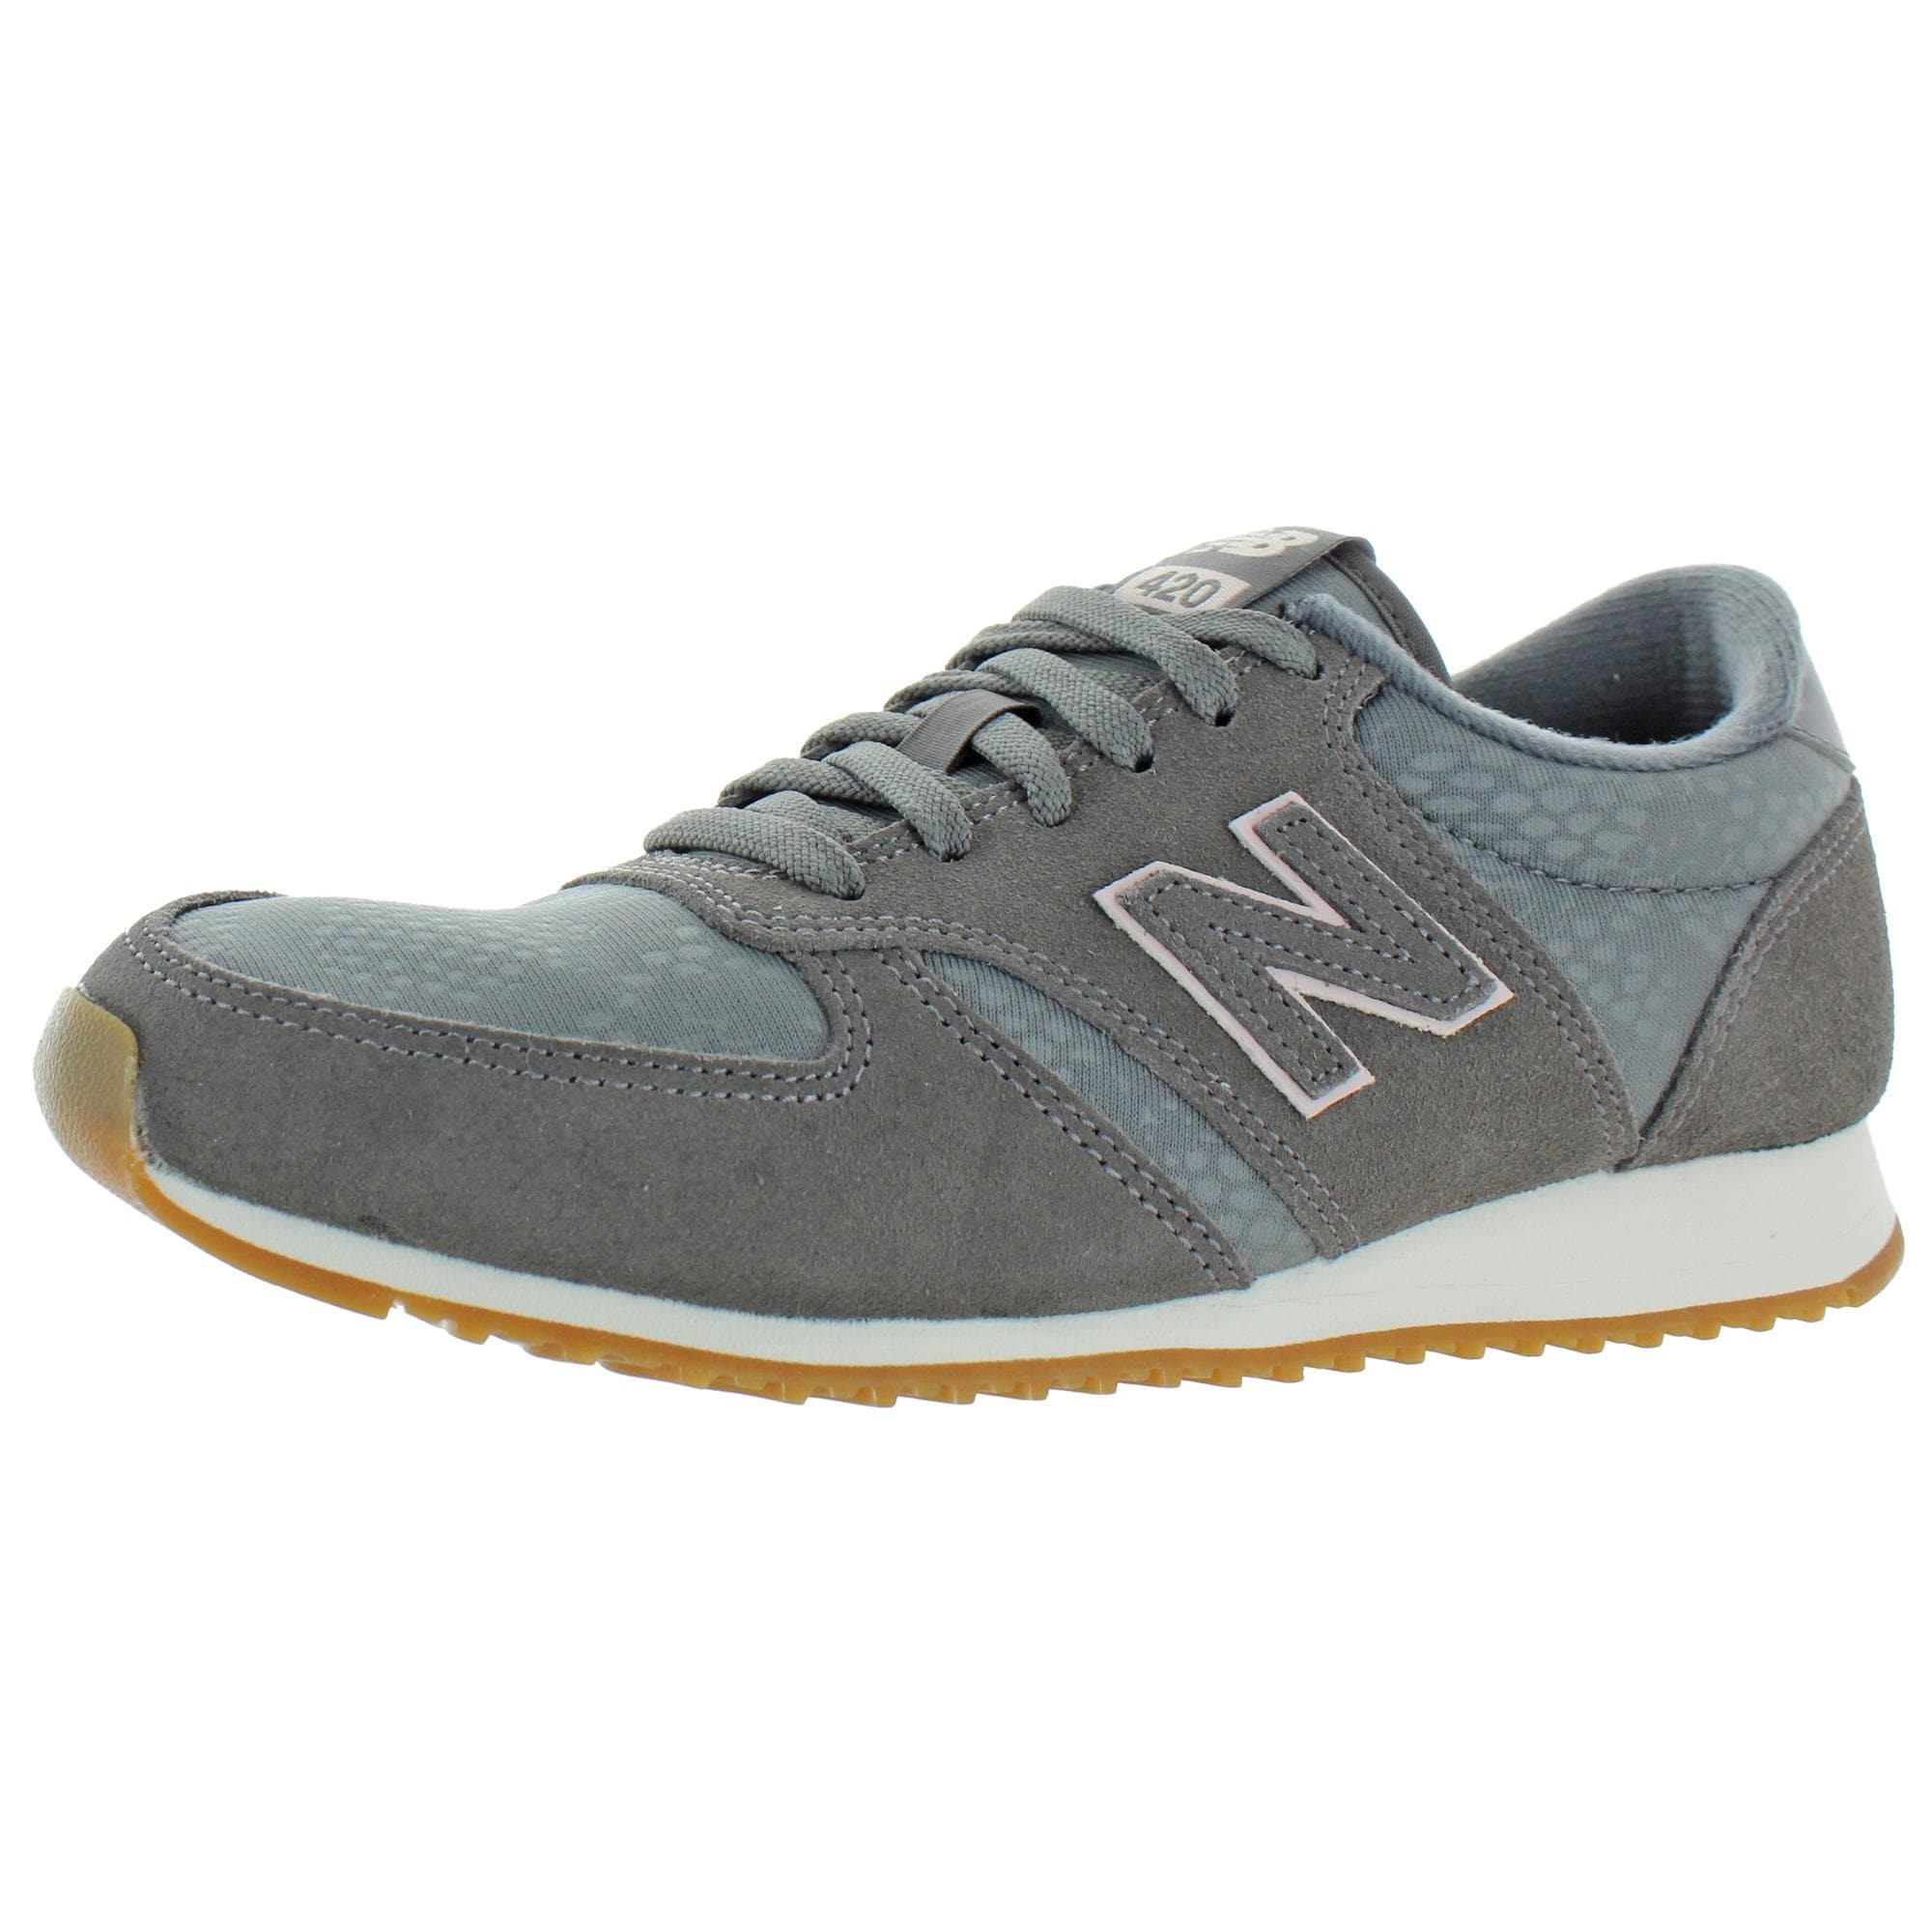 New Balance Women's WL420 Suede Casual 